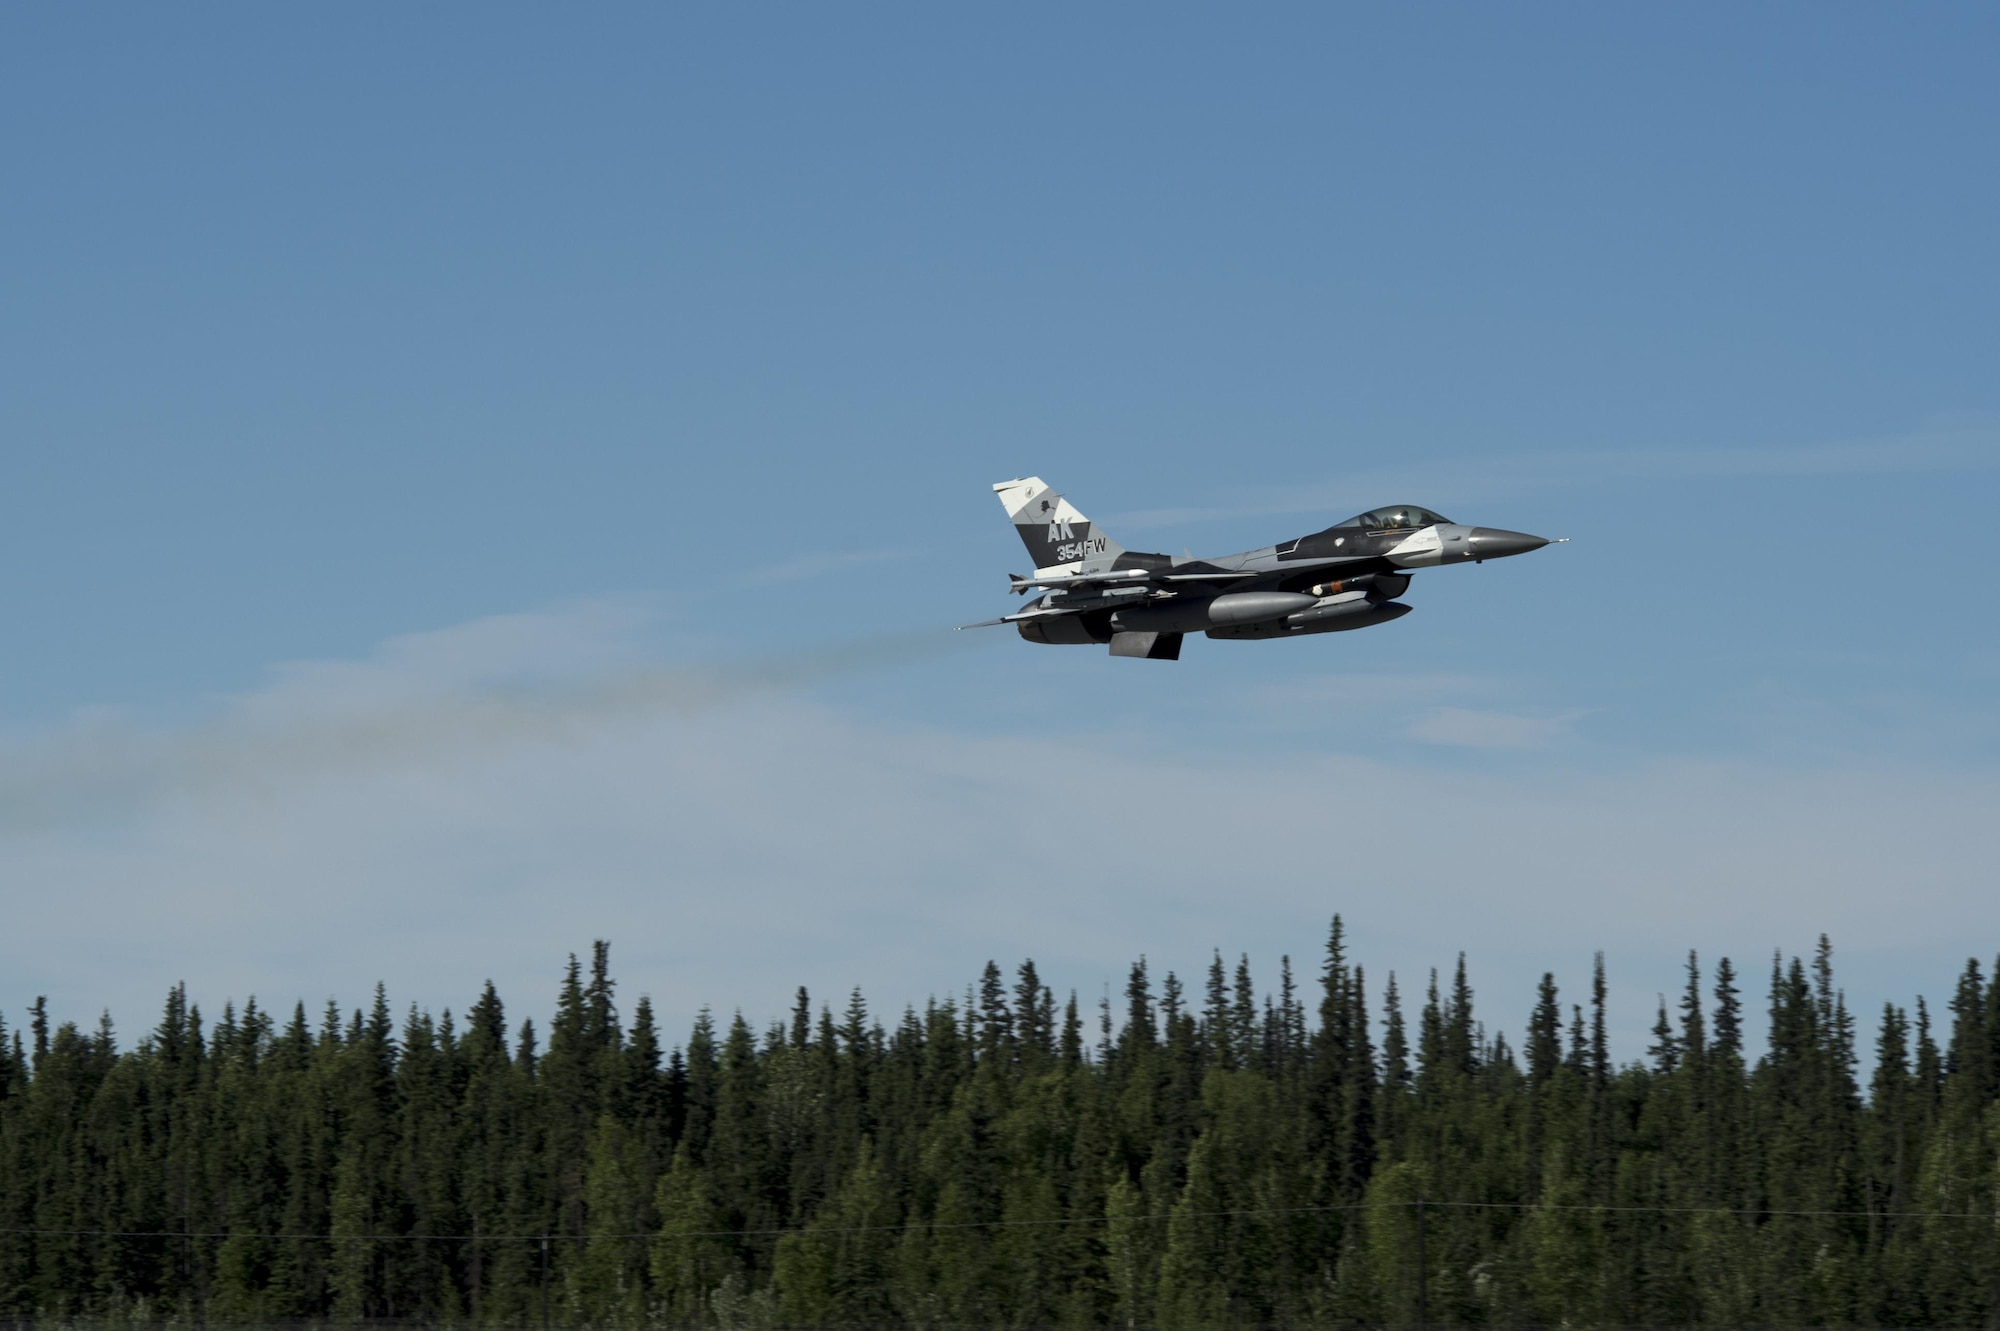 A U.S. Air Force F-16 Fighting Falcon aircraft takes off from the flight line during RED FLAG-Alaska 17-2 June 13, 2017, at Eielson Air Base, Alaska. RED FLAG-Alaska provides an optimal training environment in the Indo-Asia Pacific Region and focuses on improving ground, space, and cyberspace combat readiness and interoperabillity for U.S. and international forces.  (U.S. Air Force photo by Airman 1st Class Haley D. Phillips)